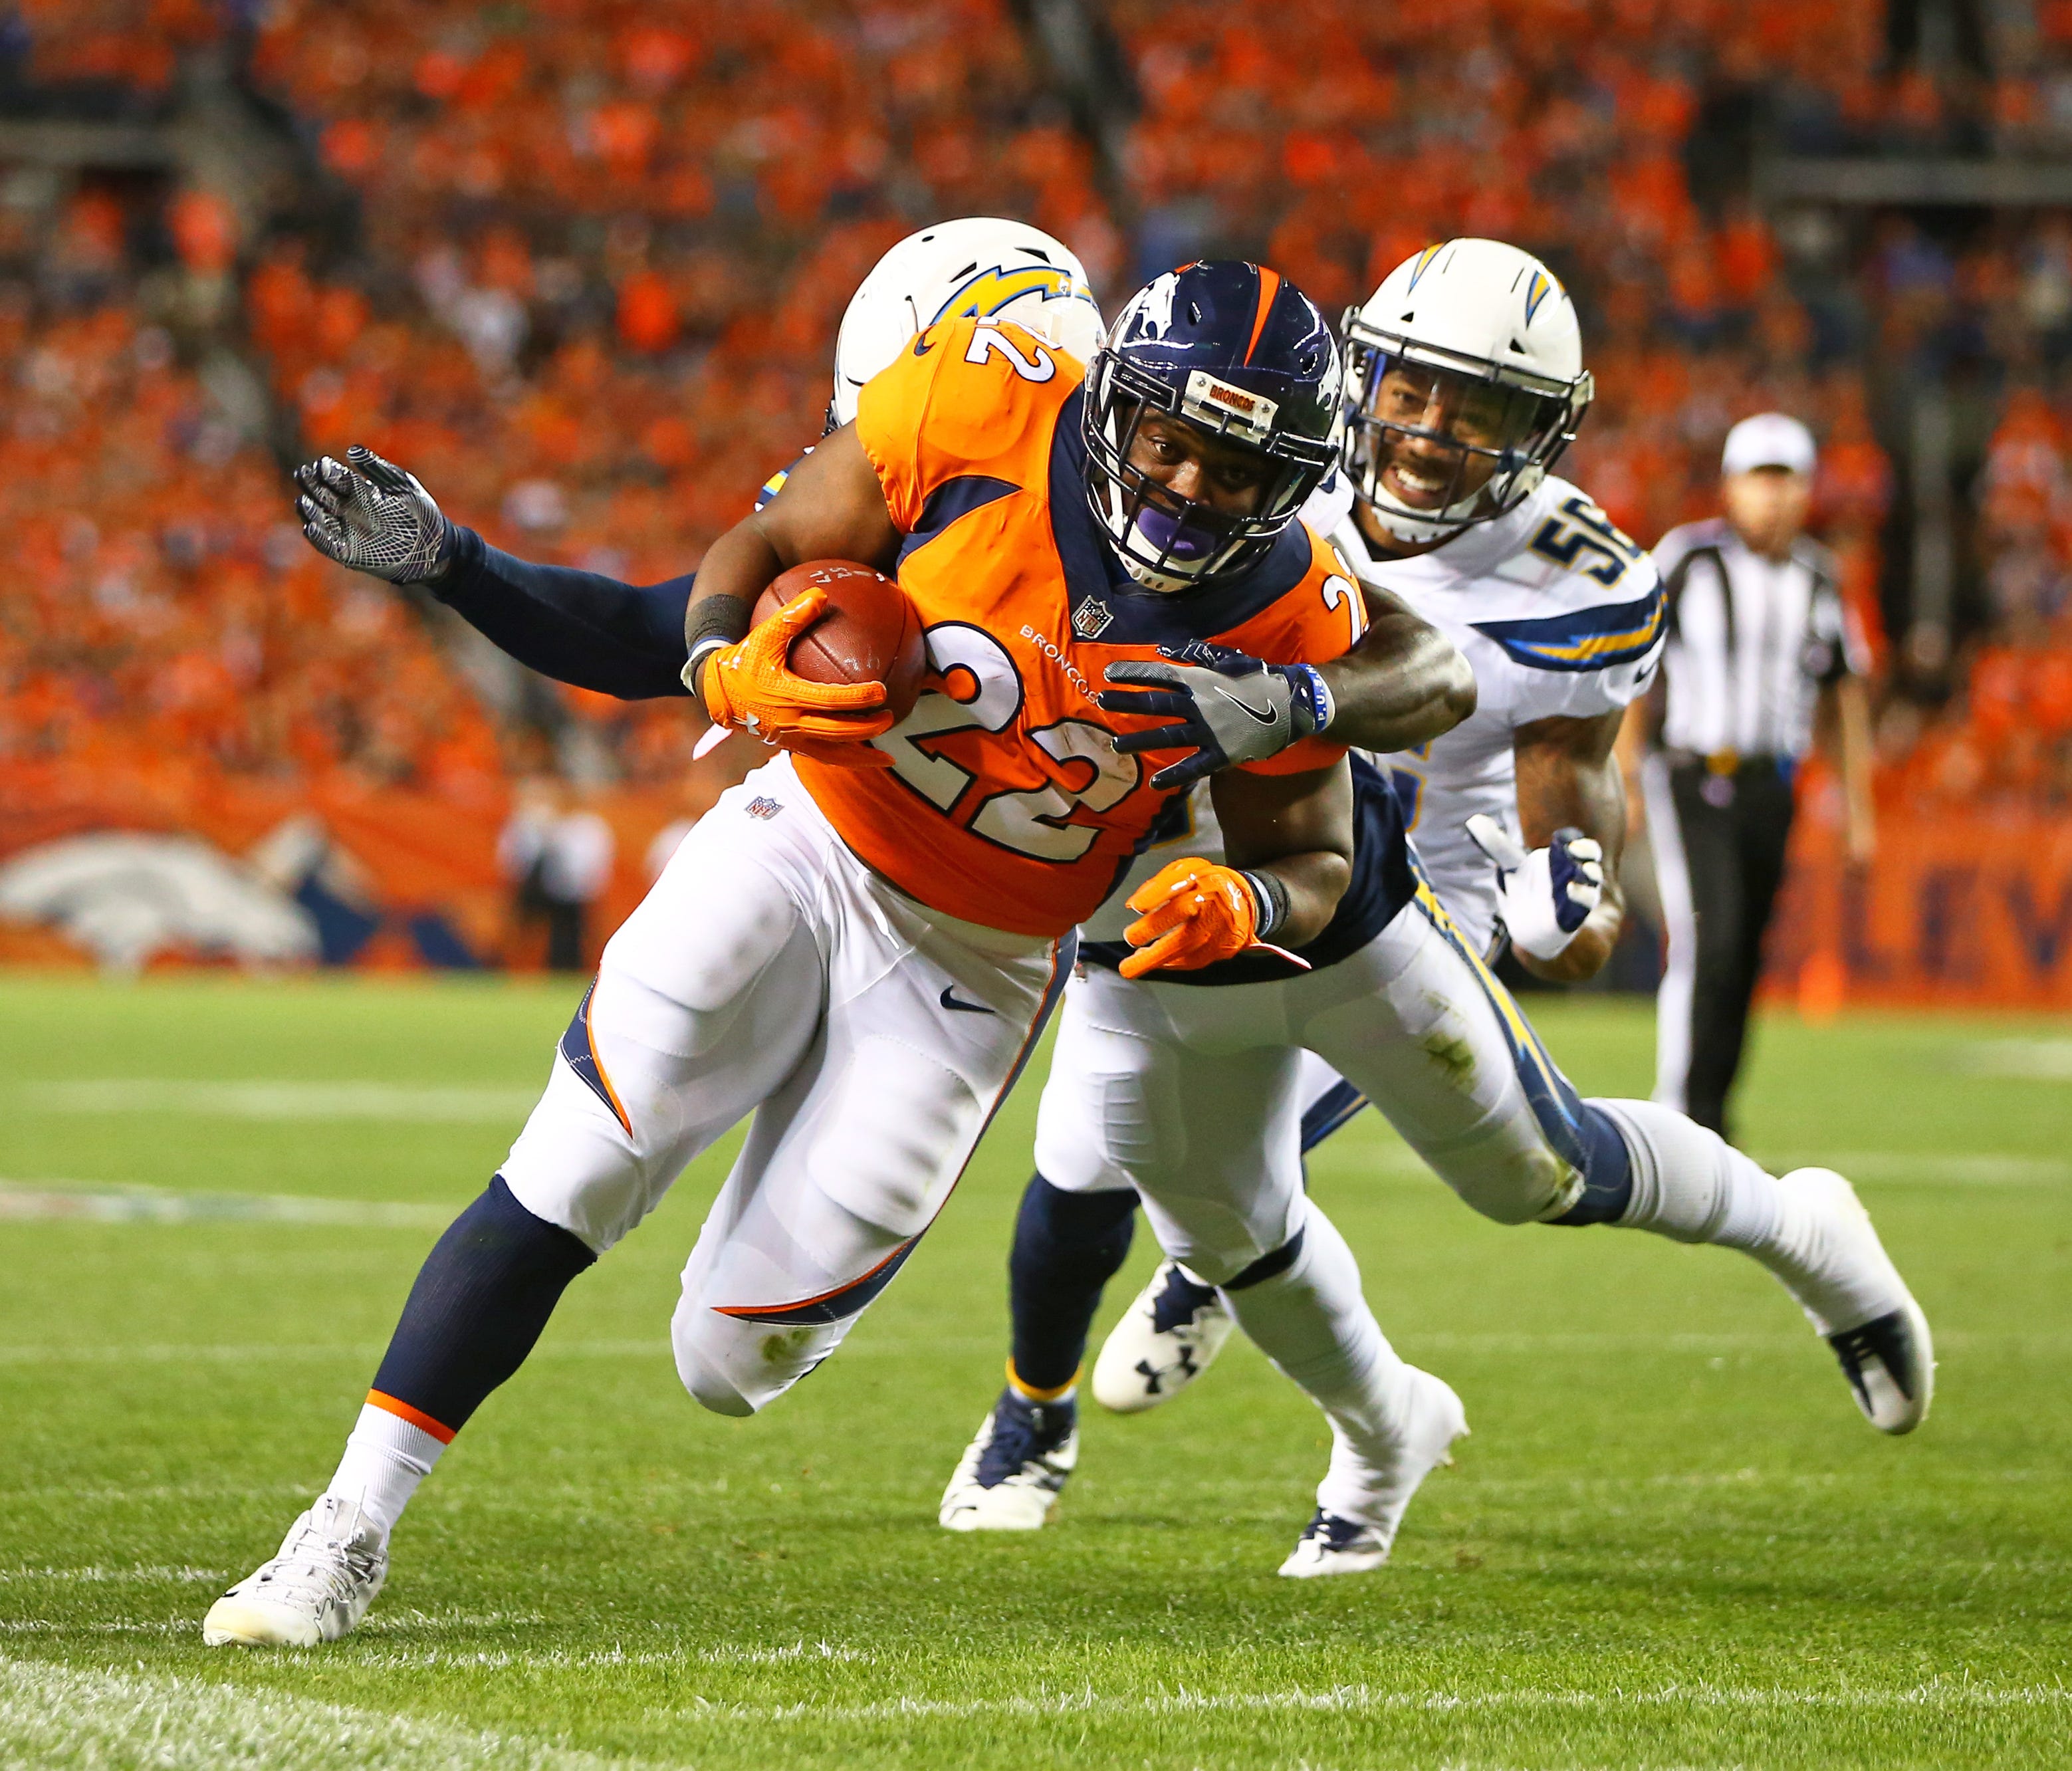 Denver Broncos running back C.J. Anderson runs the ball in the first quarter against the Los Angeles Chargers at Sports Authority Field in Denver.